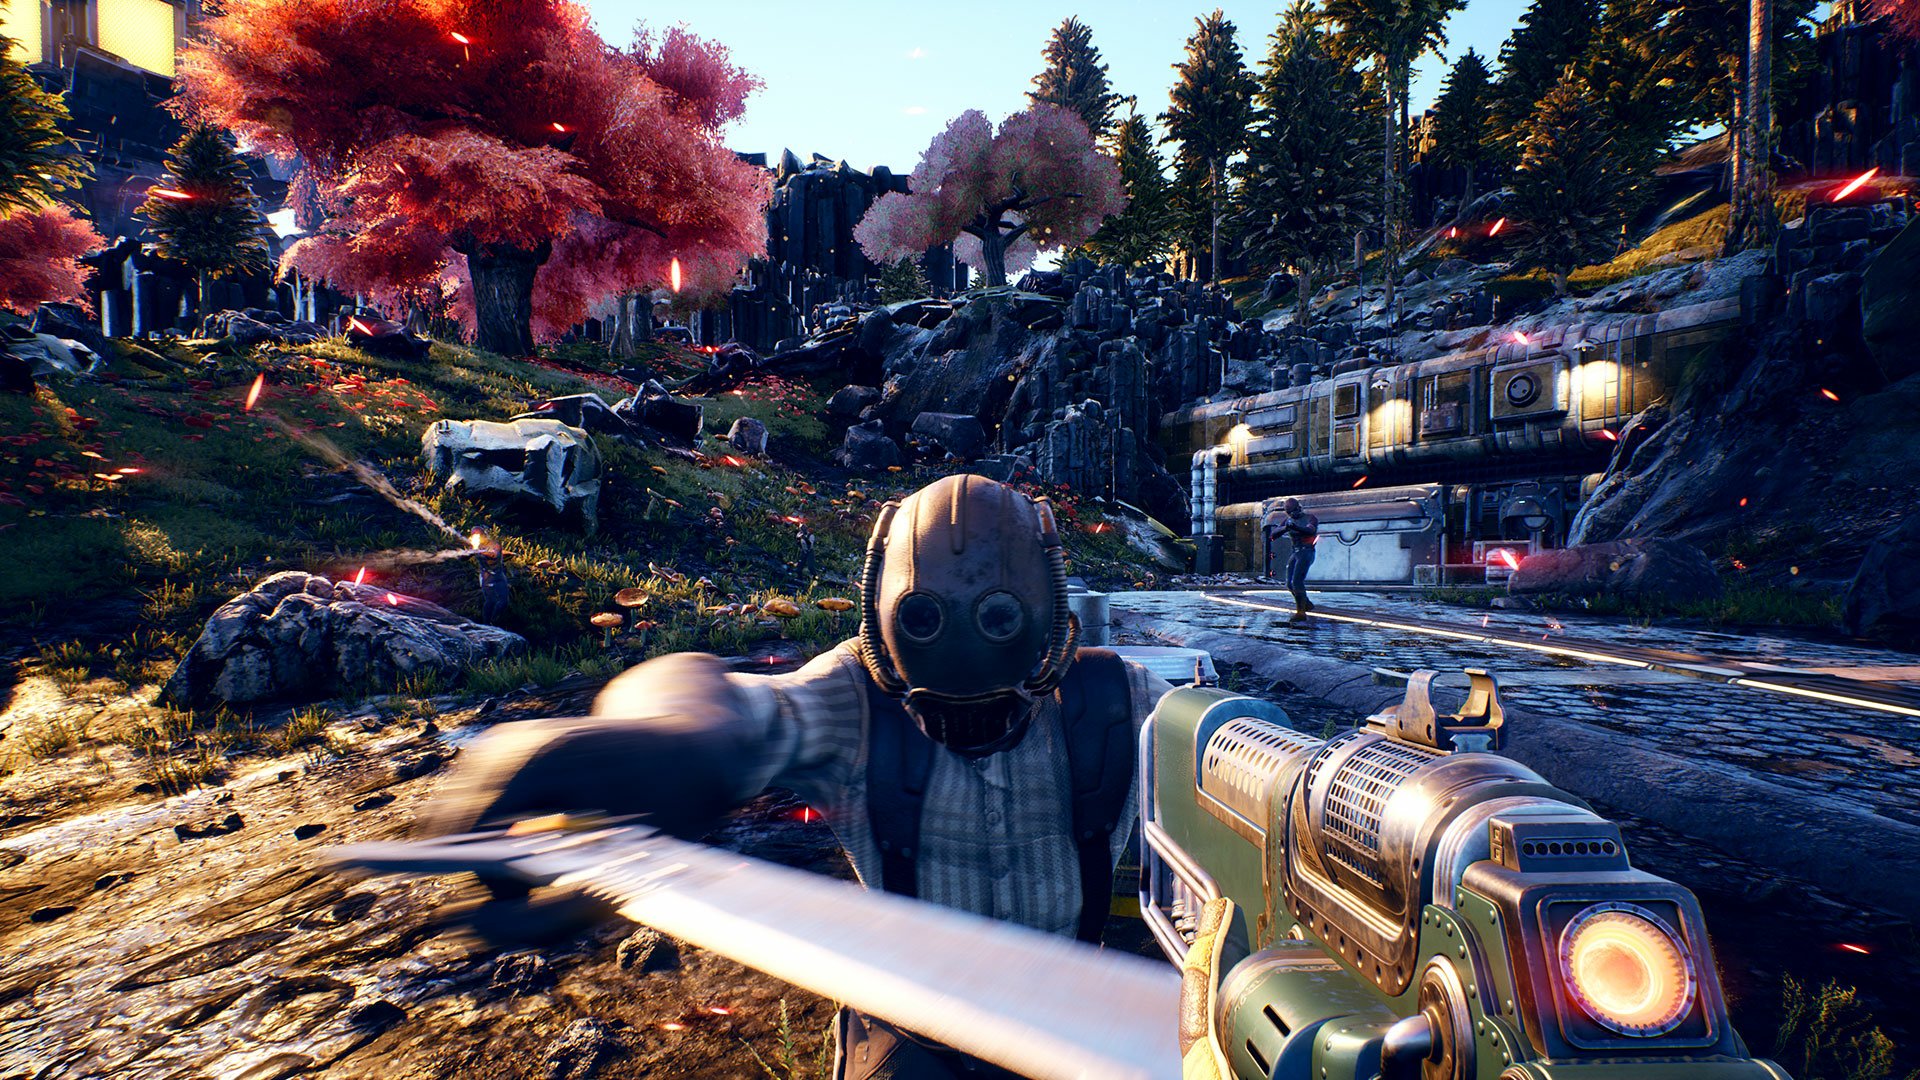 The Outer Worlds Gameplay Walkthrough Part 5  World wallpaper, Space phone  wallpaper, Video game backgrounds